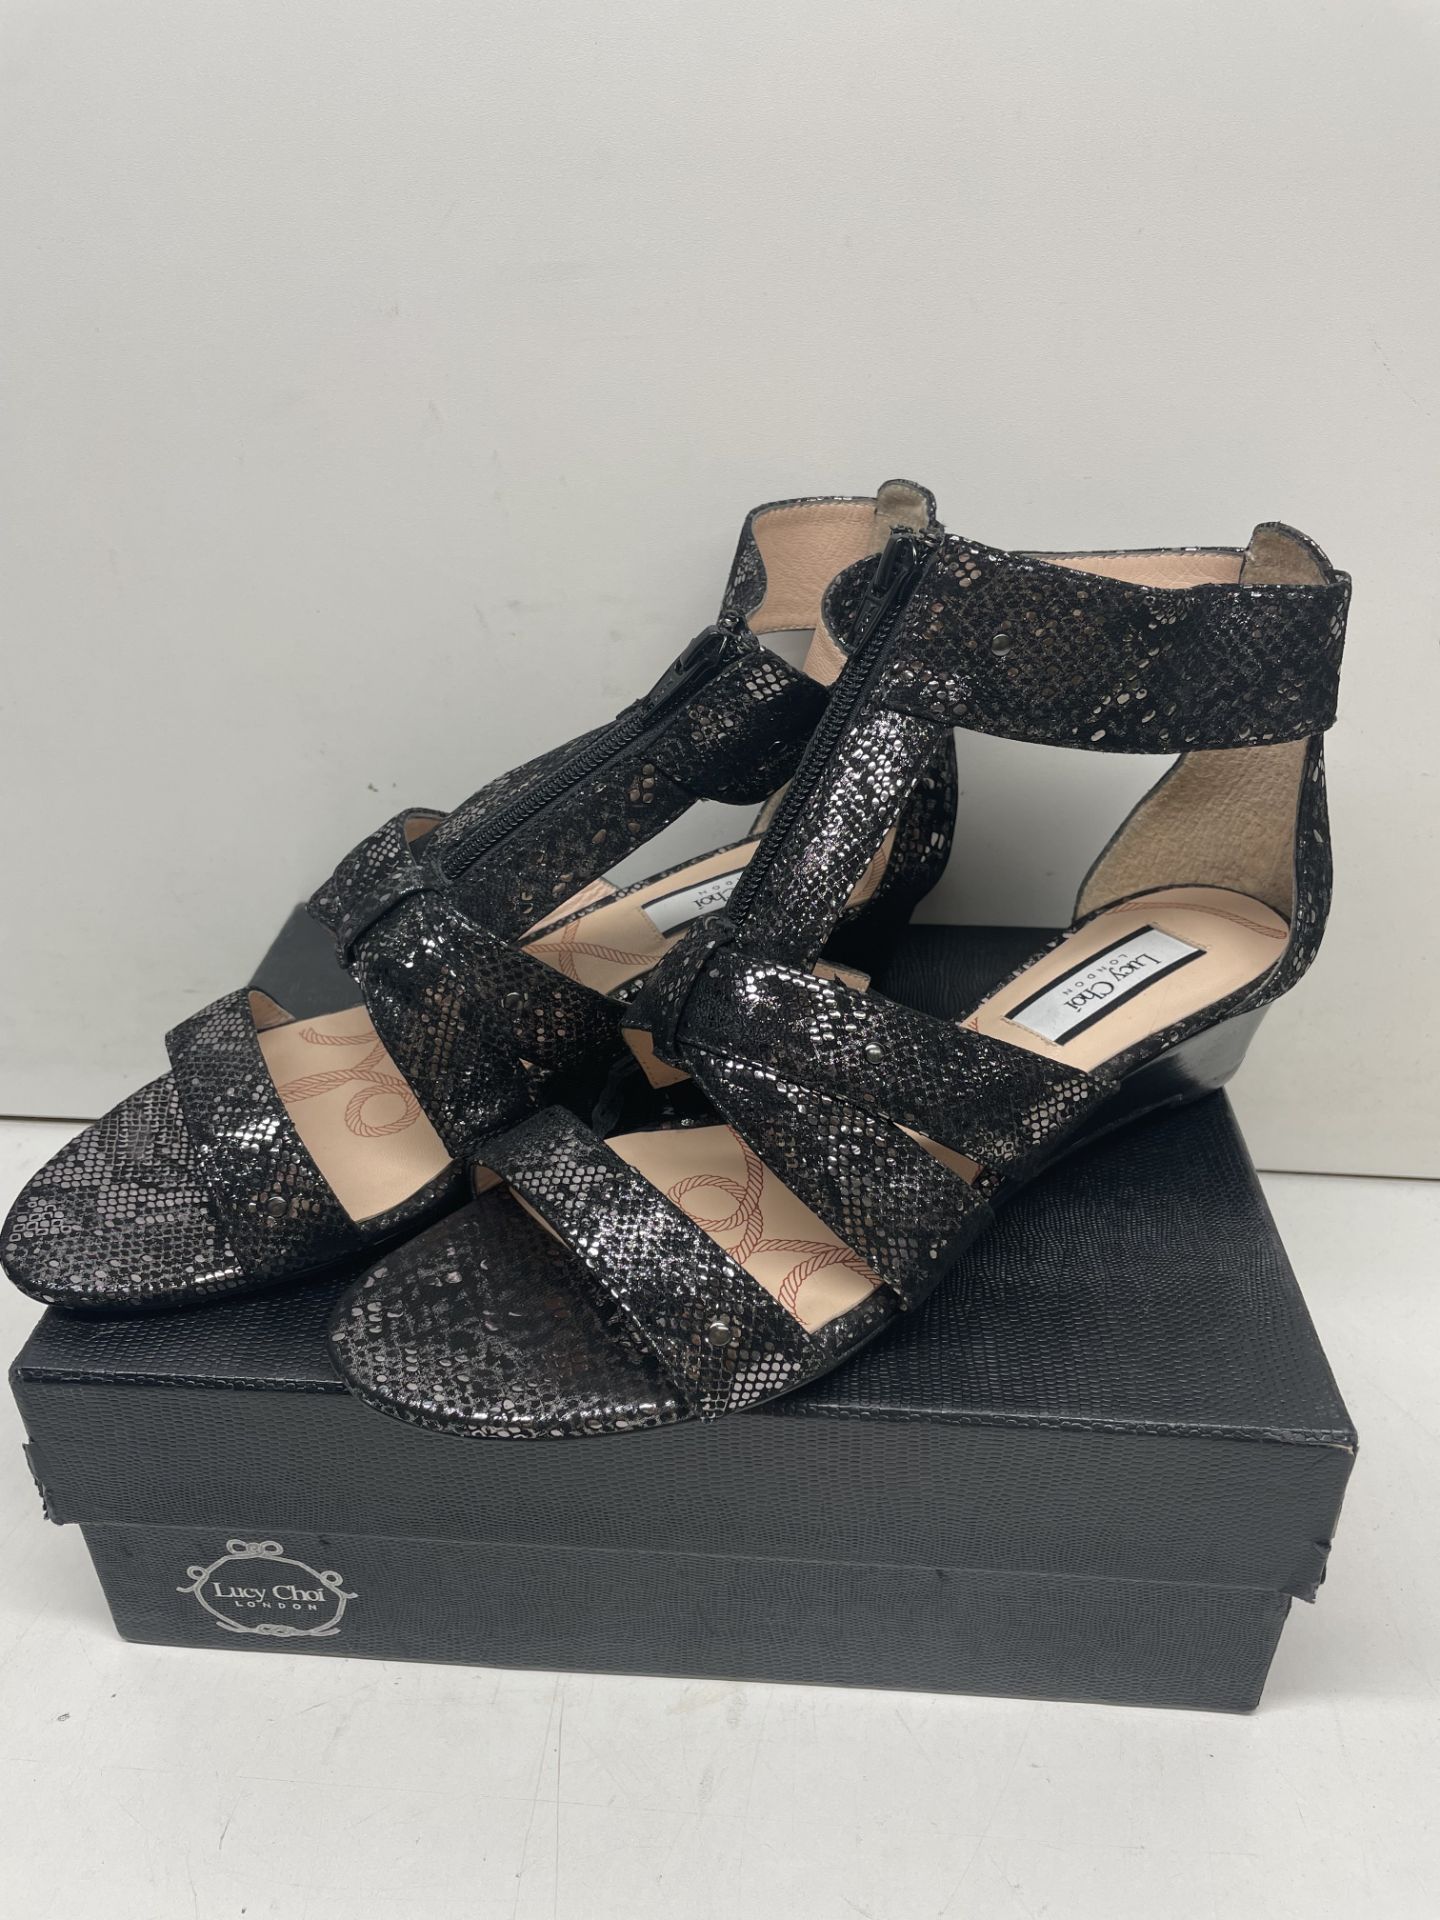 Ex-Display Lucy Choi Wedge Sandals | Eur 42 - Image 2 of 4